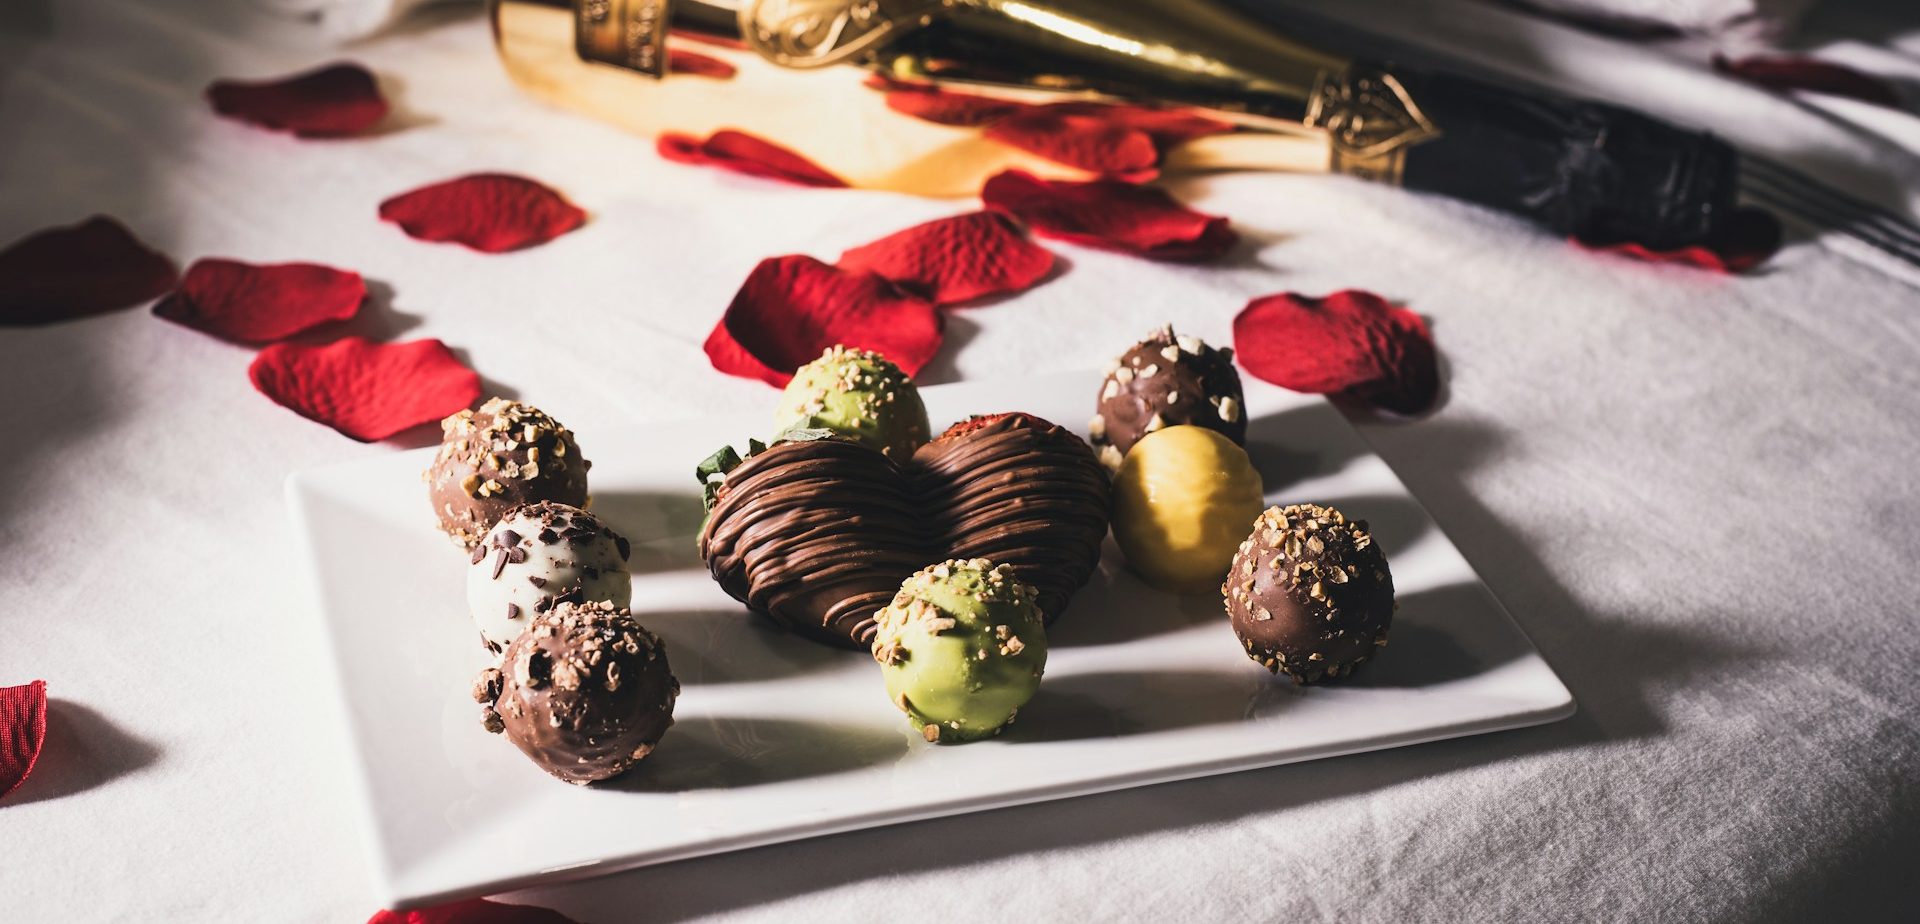 Indulge in Love: Playful and Romantic Date Ideas for World Chocolate Day